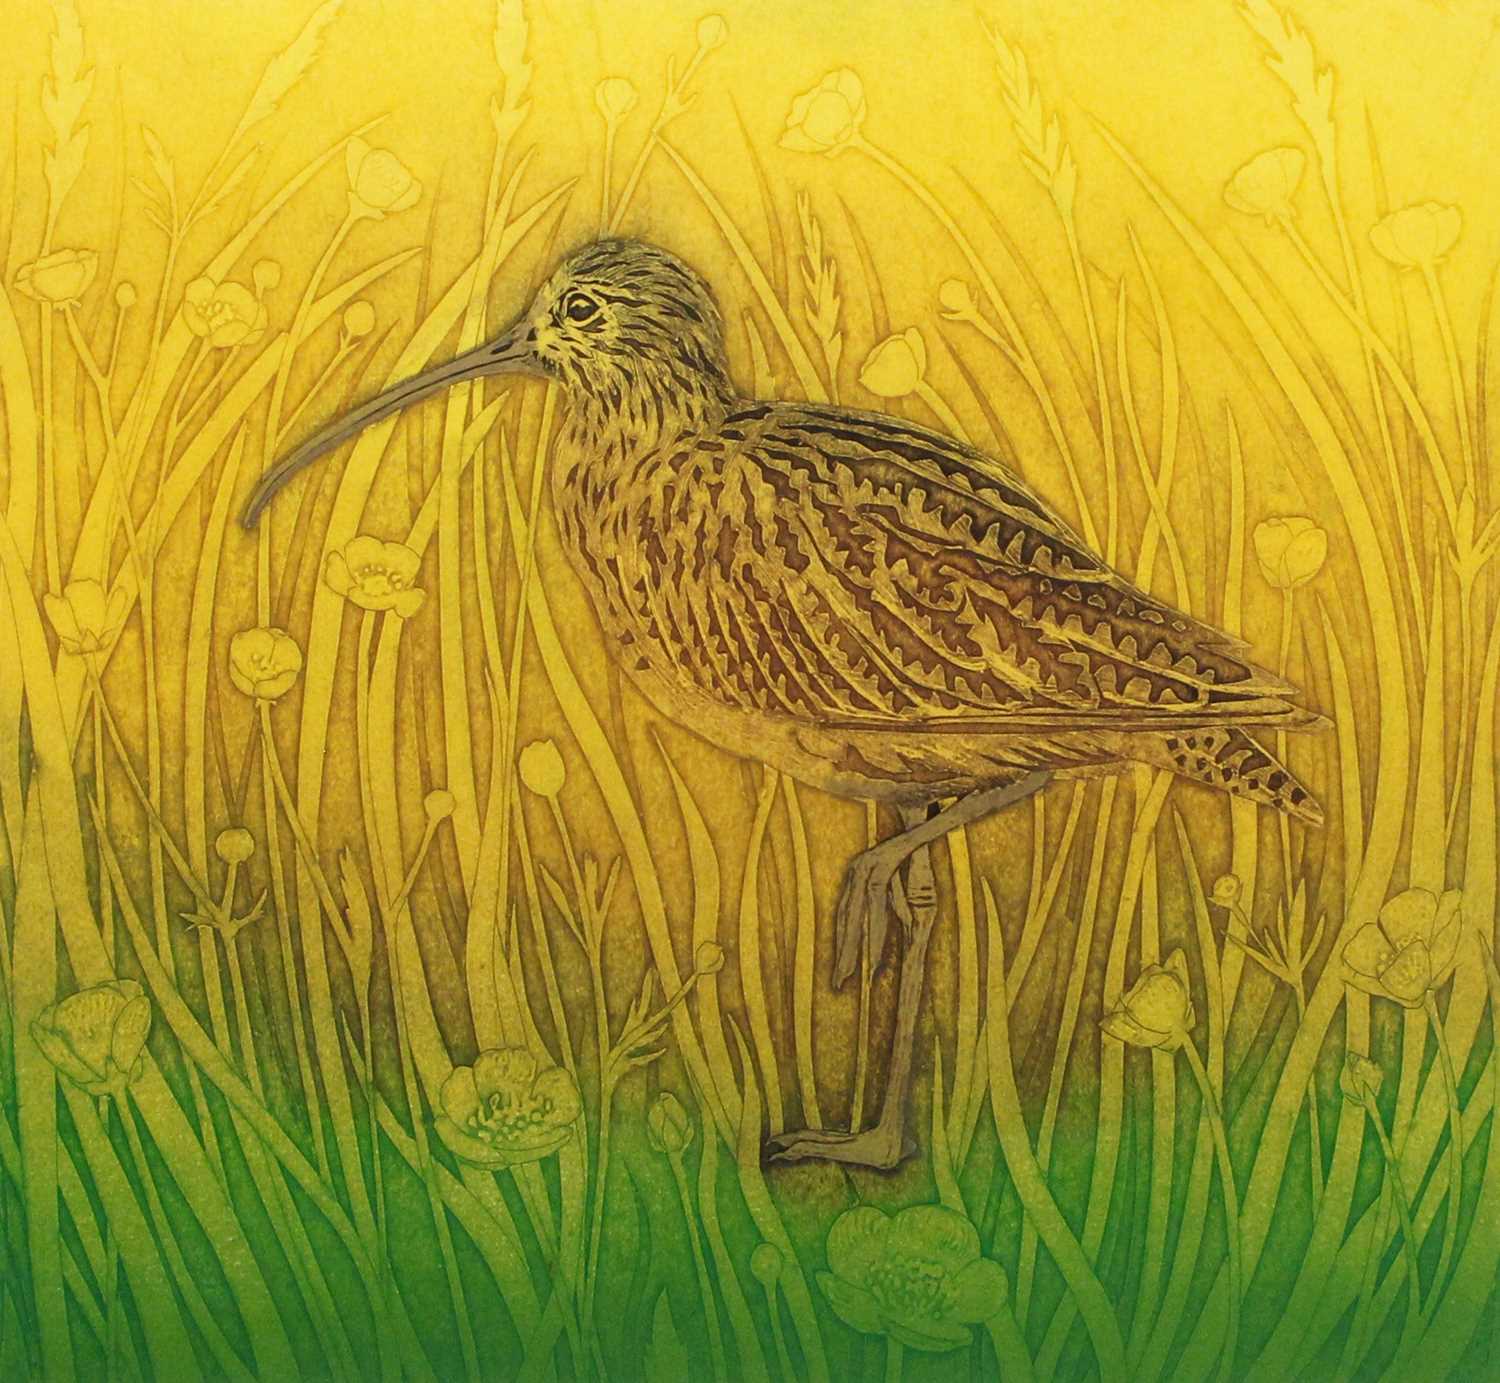 Hester Cox (Contemporary) "Curlew Summer" Limited edition collagraph print, signed and numbered 16/